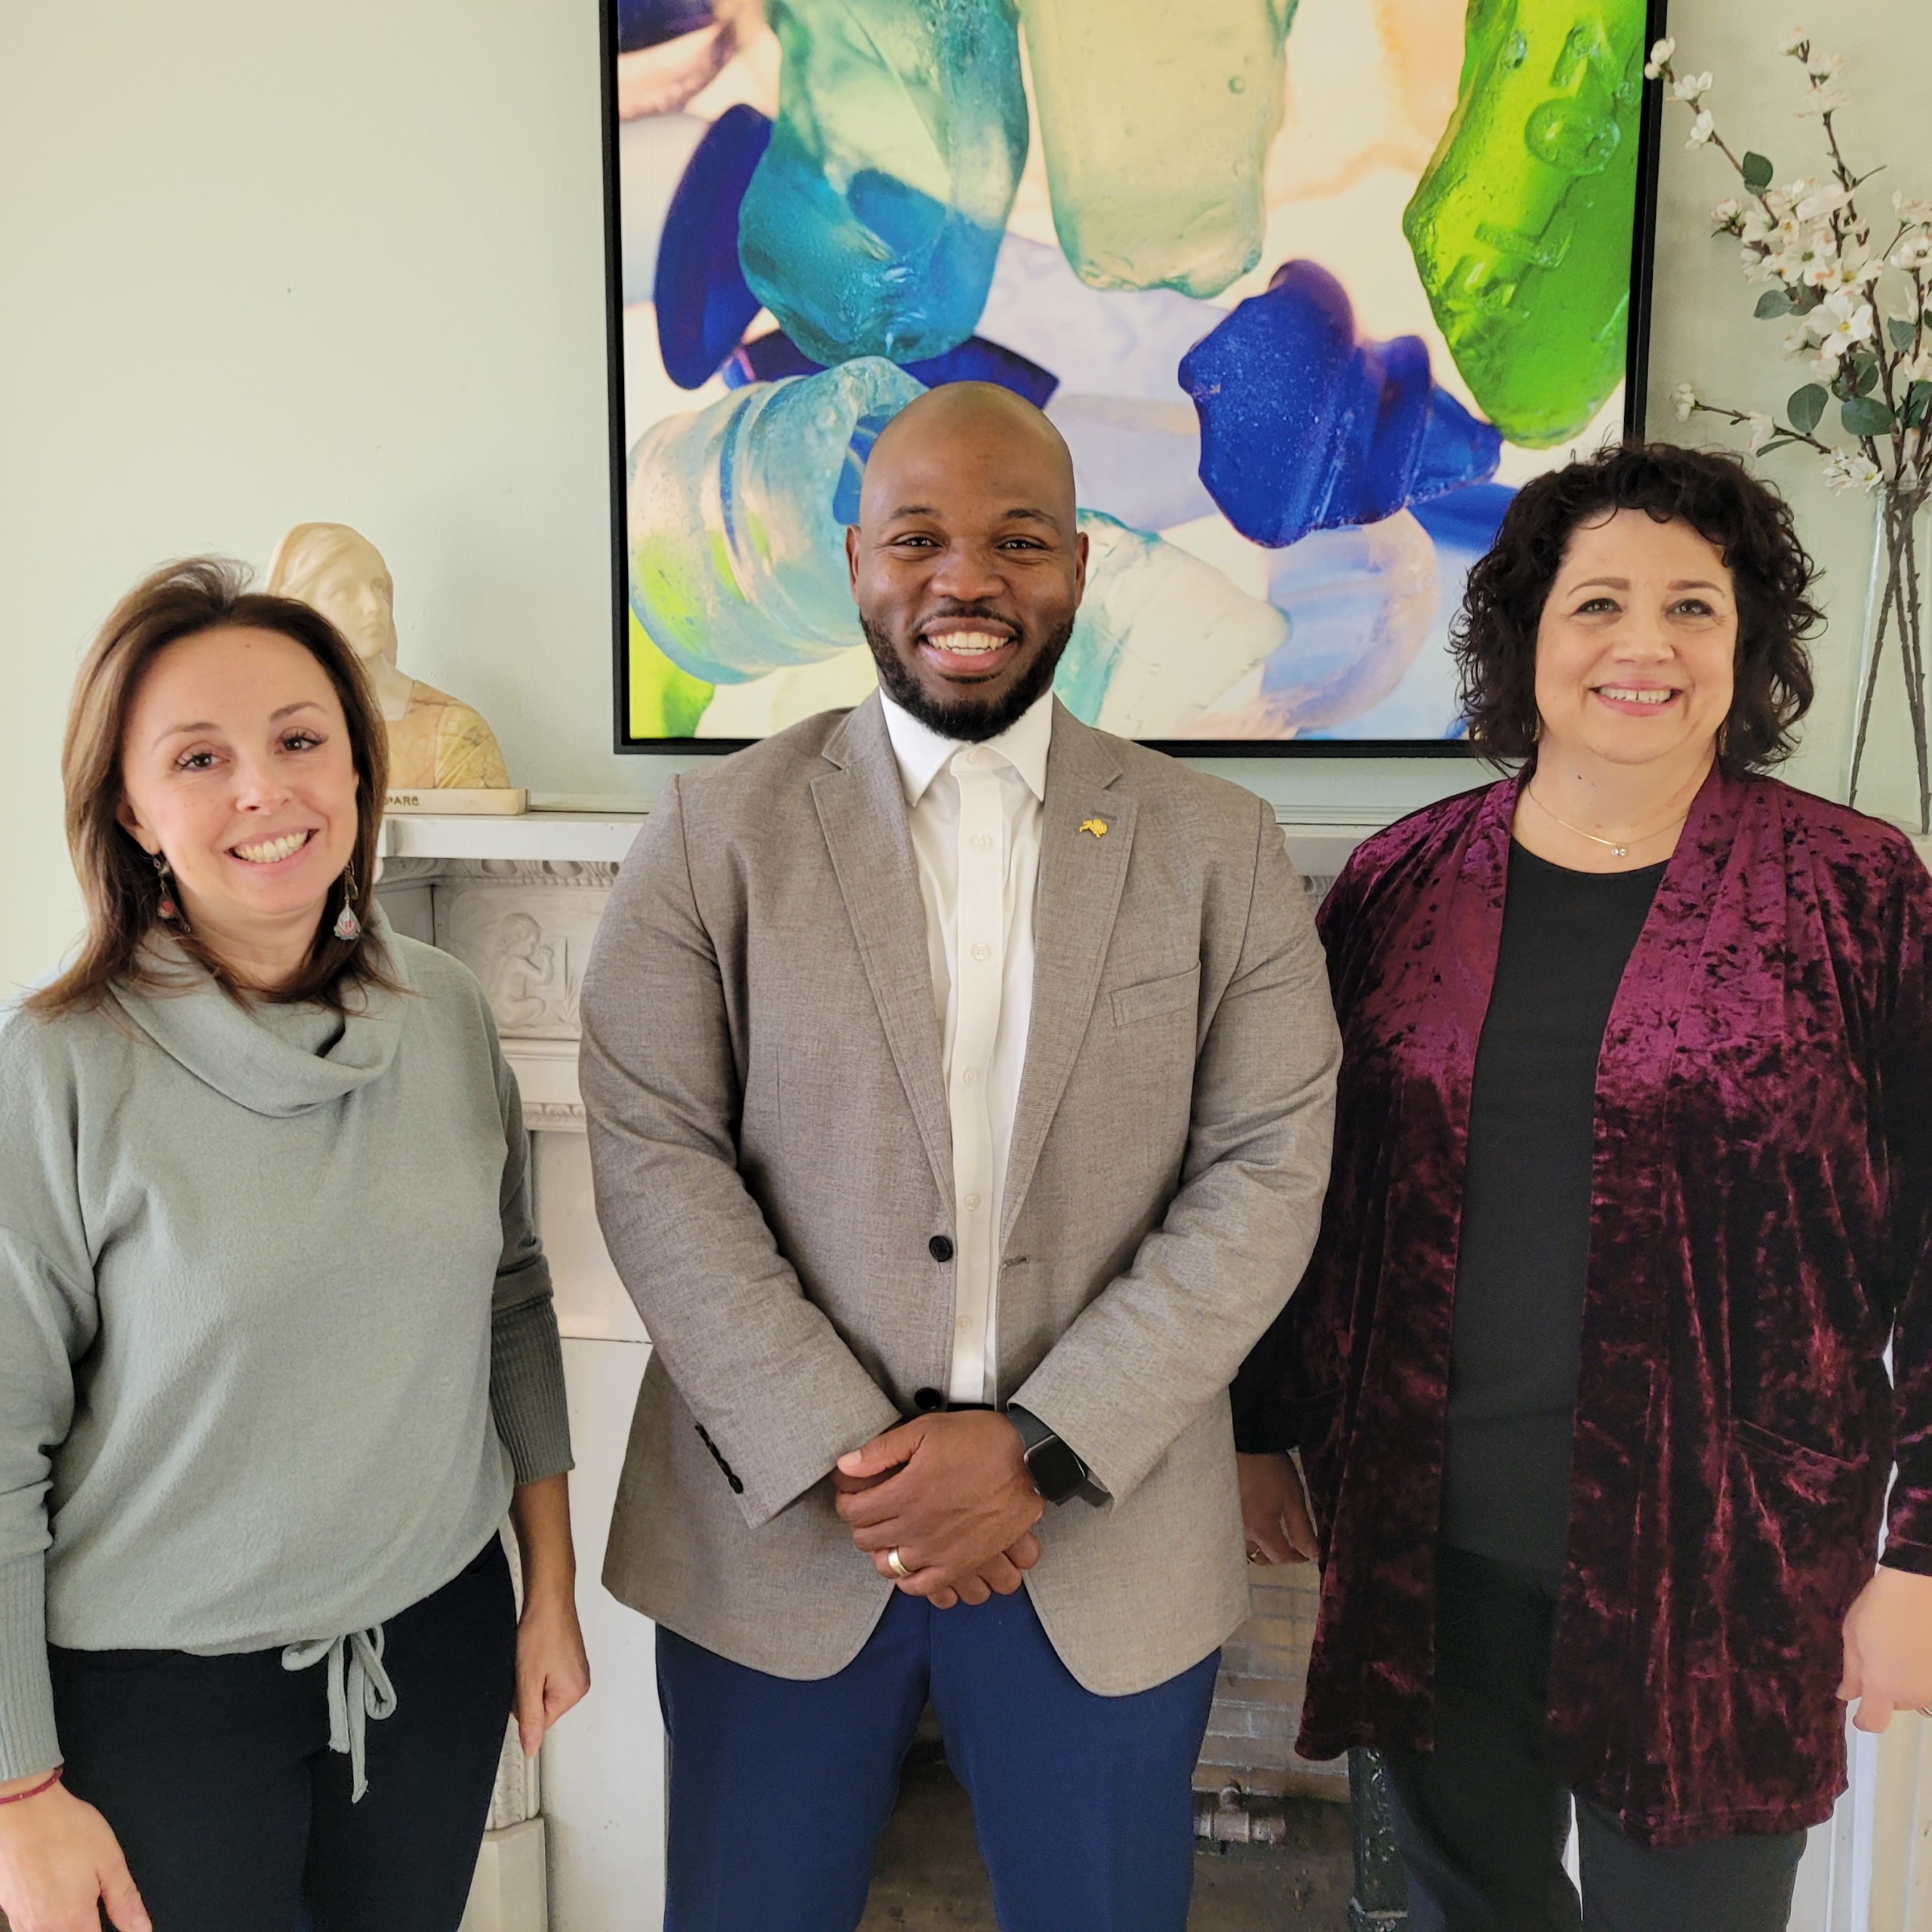 IIB Executive Director, Jennifer Rizzo-Choi standing with Buffalo's Director of the Office of New Americans, Darren Saxon, and Denise Phillips Behag, Director of New American Integration